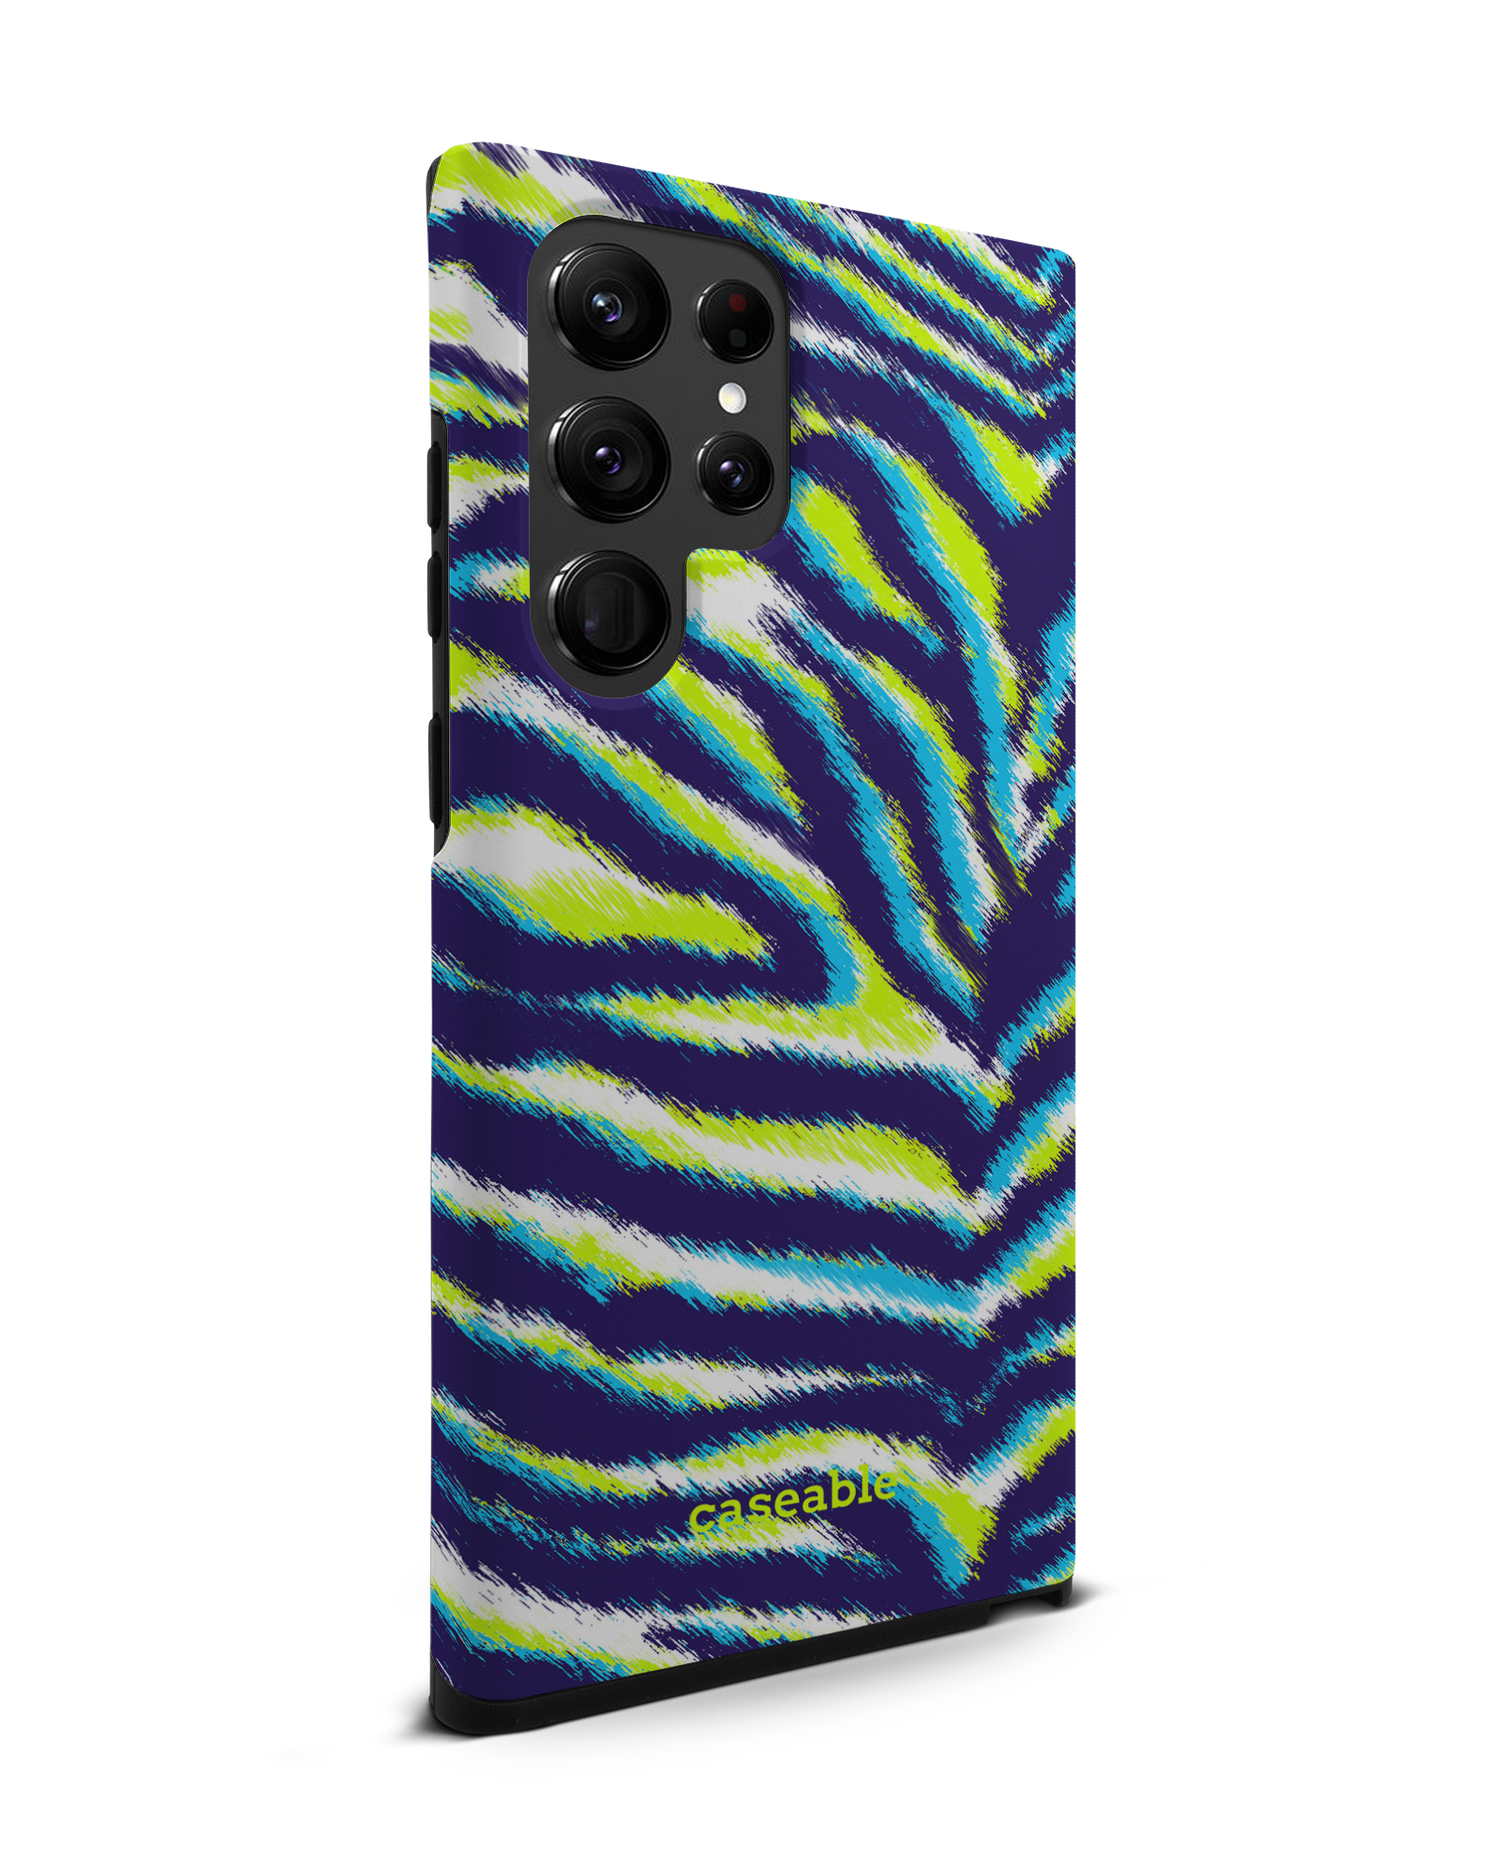 Neon Zebra Premium Phone Case Samsung Galaxy S22 Ultra 5G: View from the left side